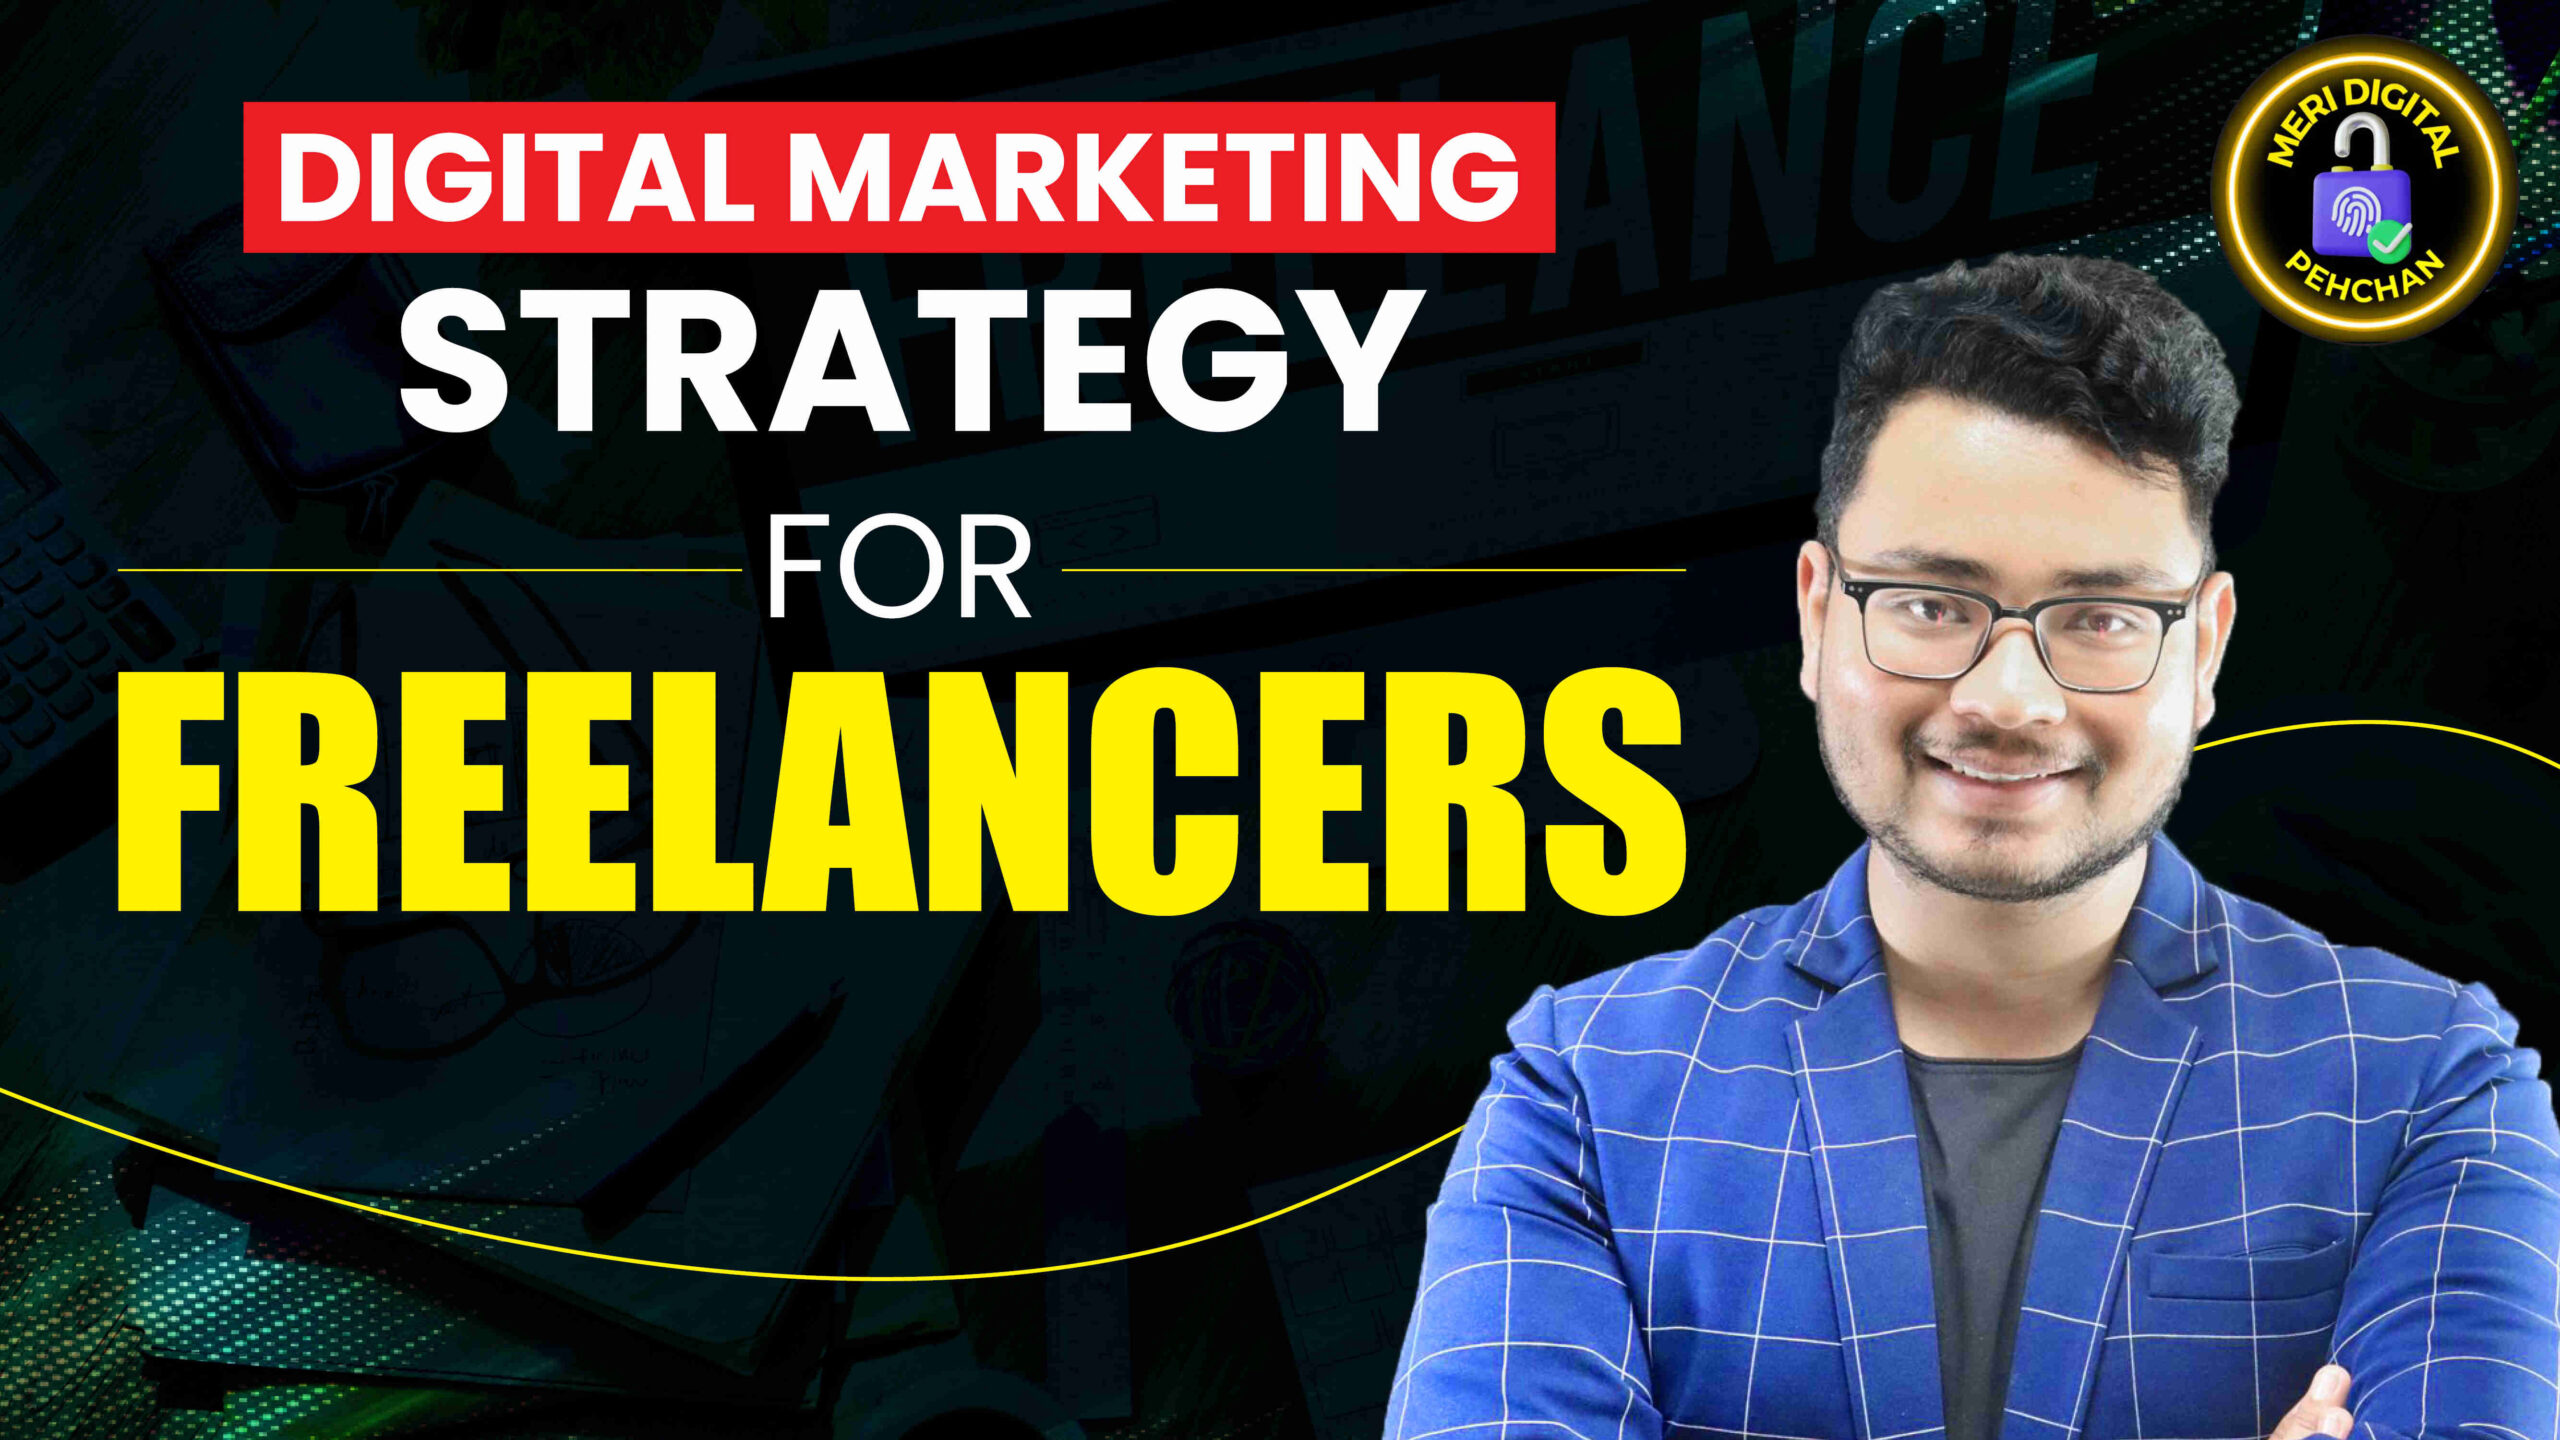 Digital Marketing Strategy for Freelancers and Contractors